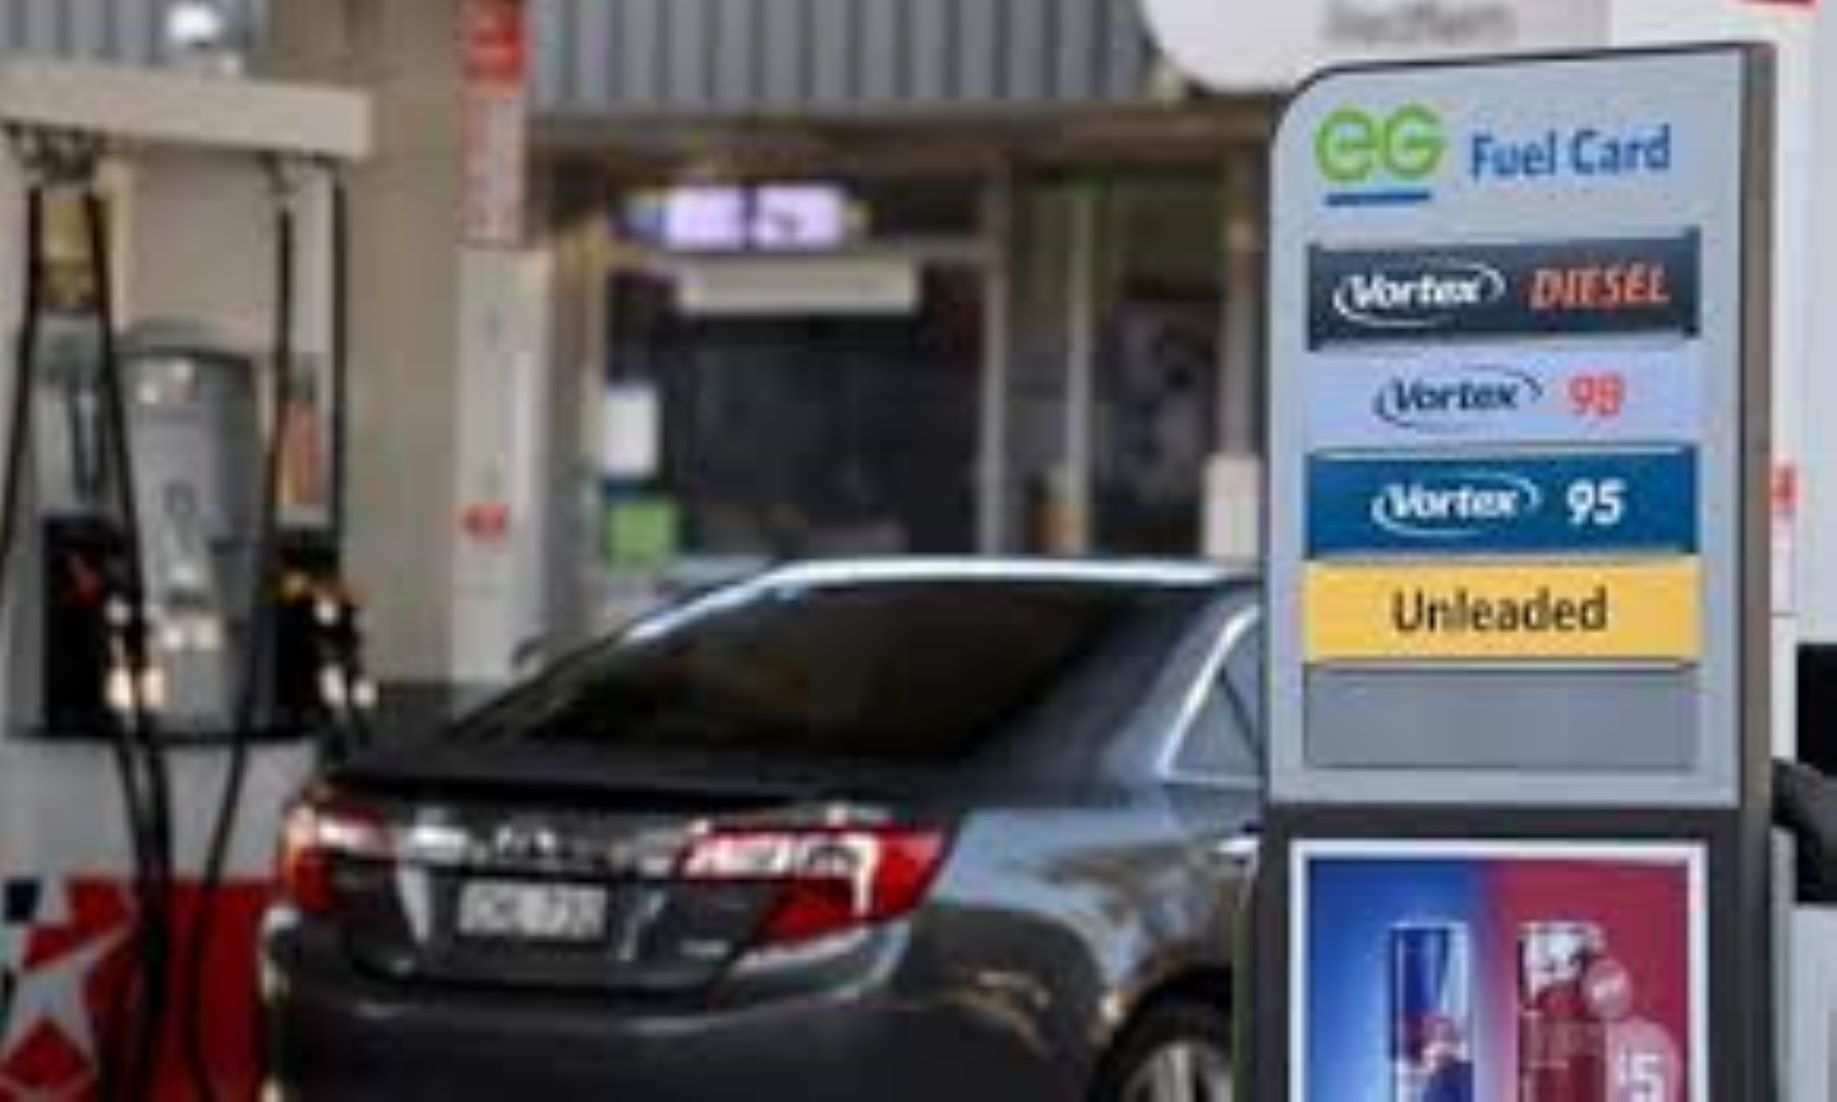 Australia’s Retail Petrol Prices Trend Downward But Still Relatively High: Report